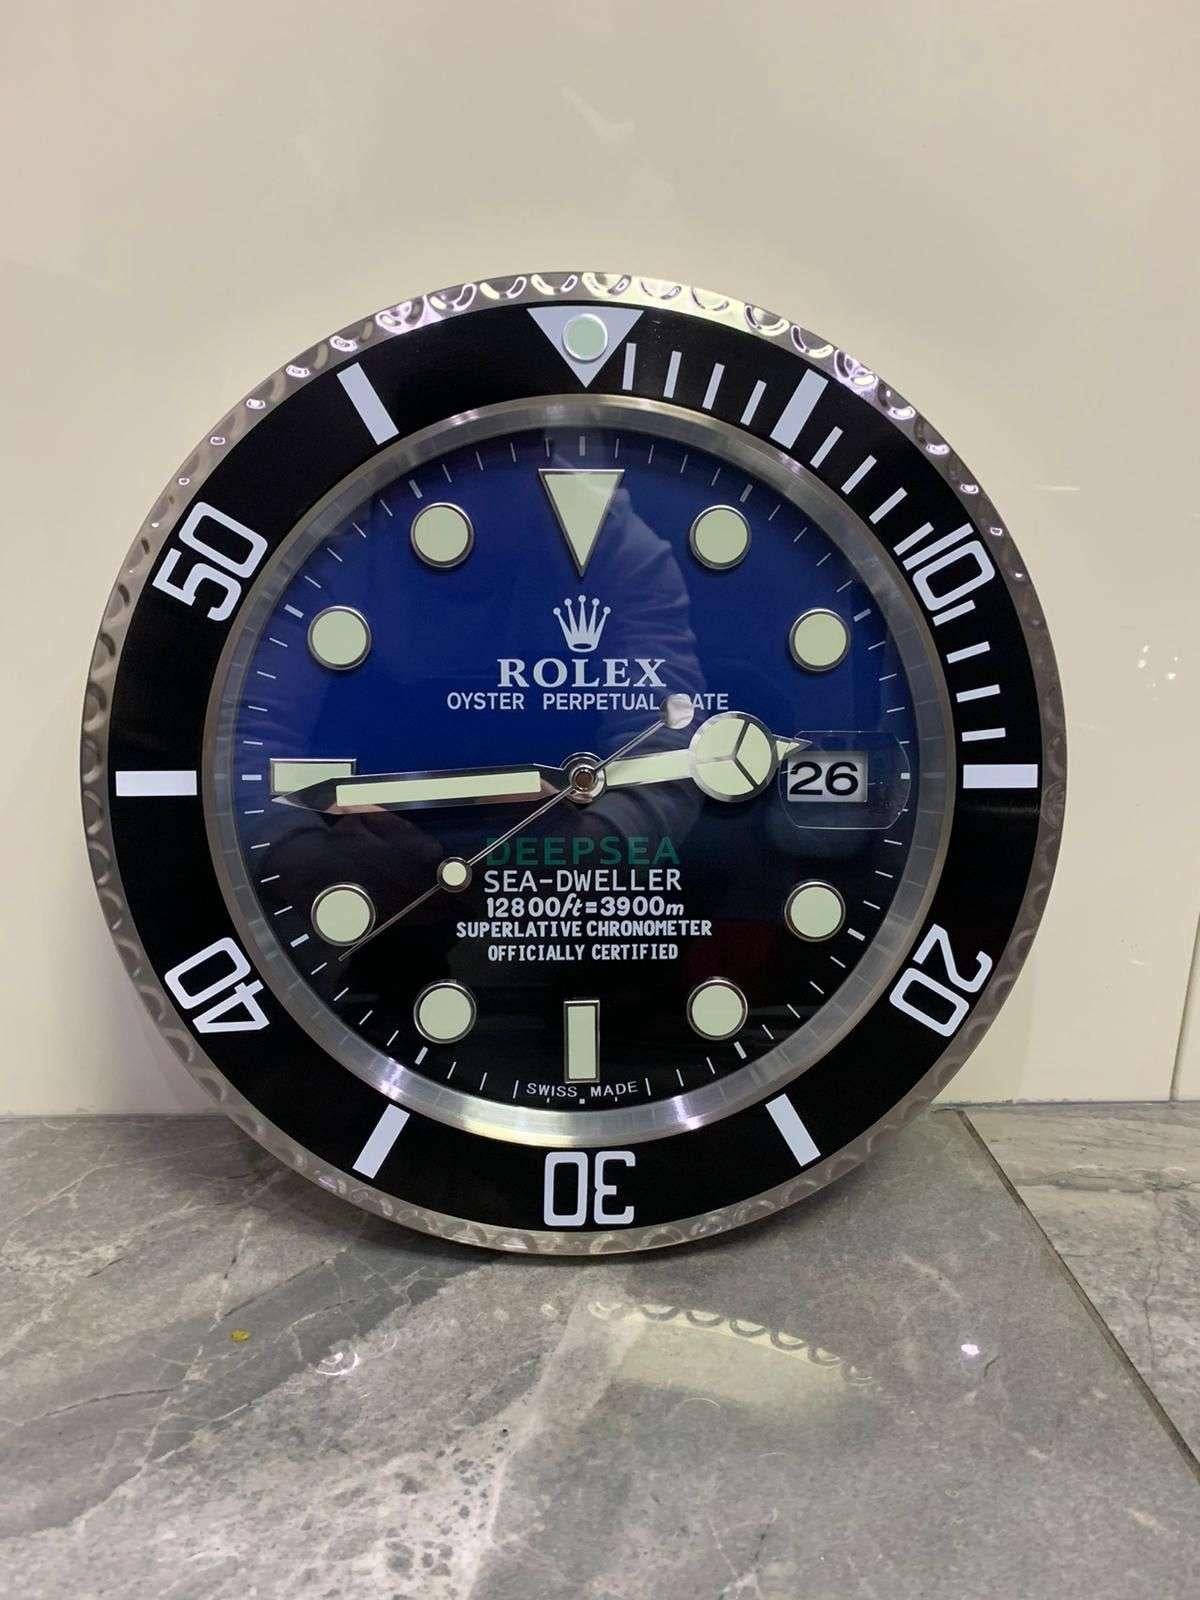 ROLEX Officially Certified Oyster Perpetual Deepsea Dweller Wall Clock 
Good condition, working.
Free international shipping.
With lume strips Sweeping Quartz movement powered by single AA Battery.
Clock dimensions measure approximately 35cm by 5cm